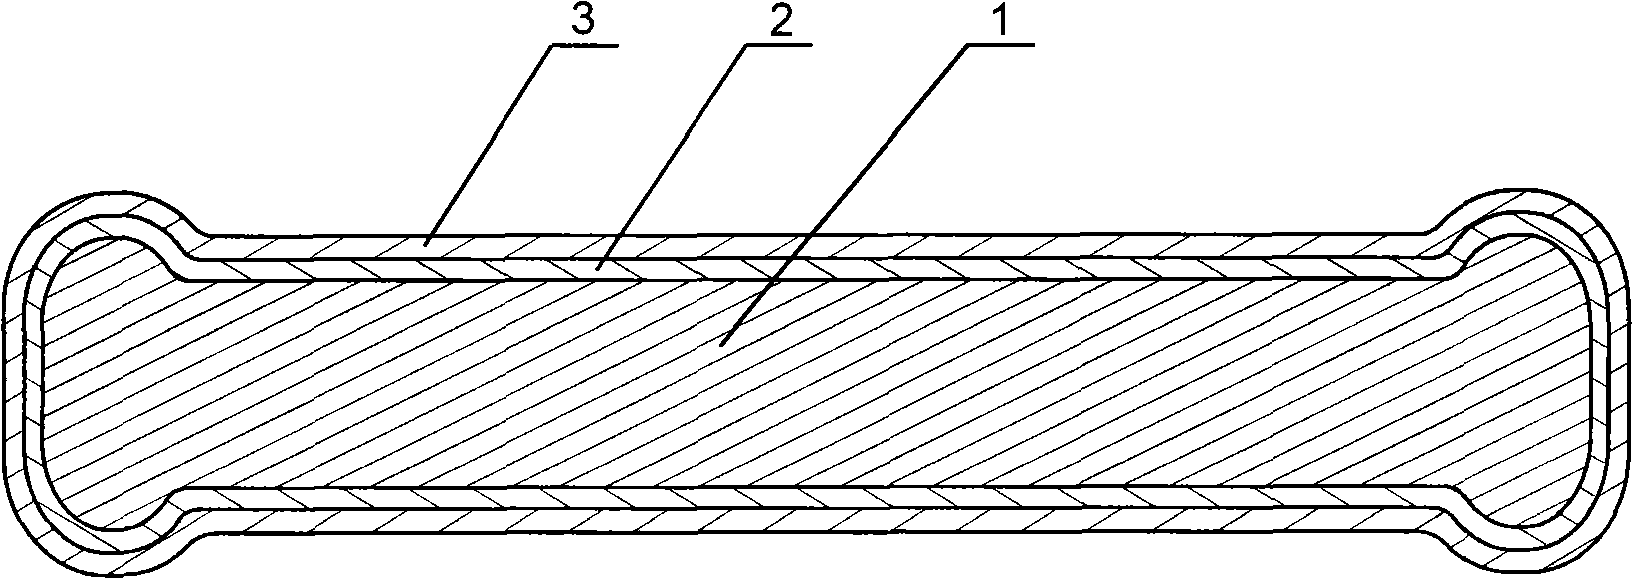 Application process of multi-layer electroplated coinage materials and products thereof